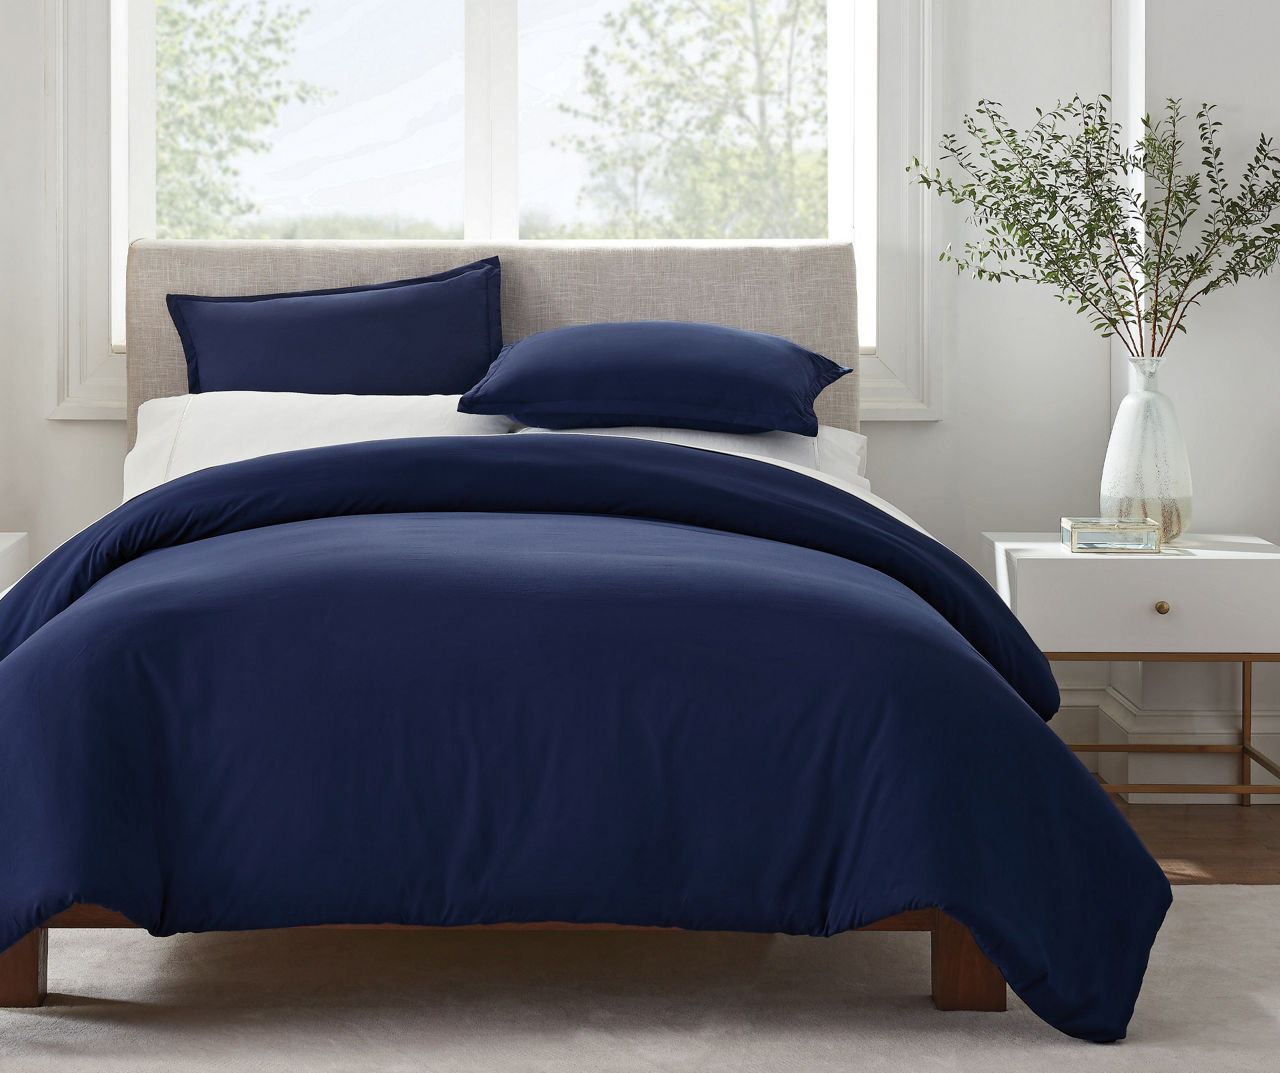 Navy Simply Clean King 3-Piece Duvet Cover Set